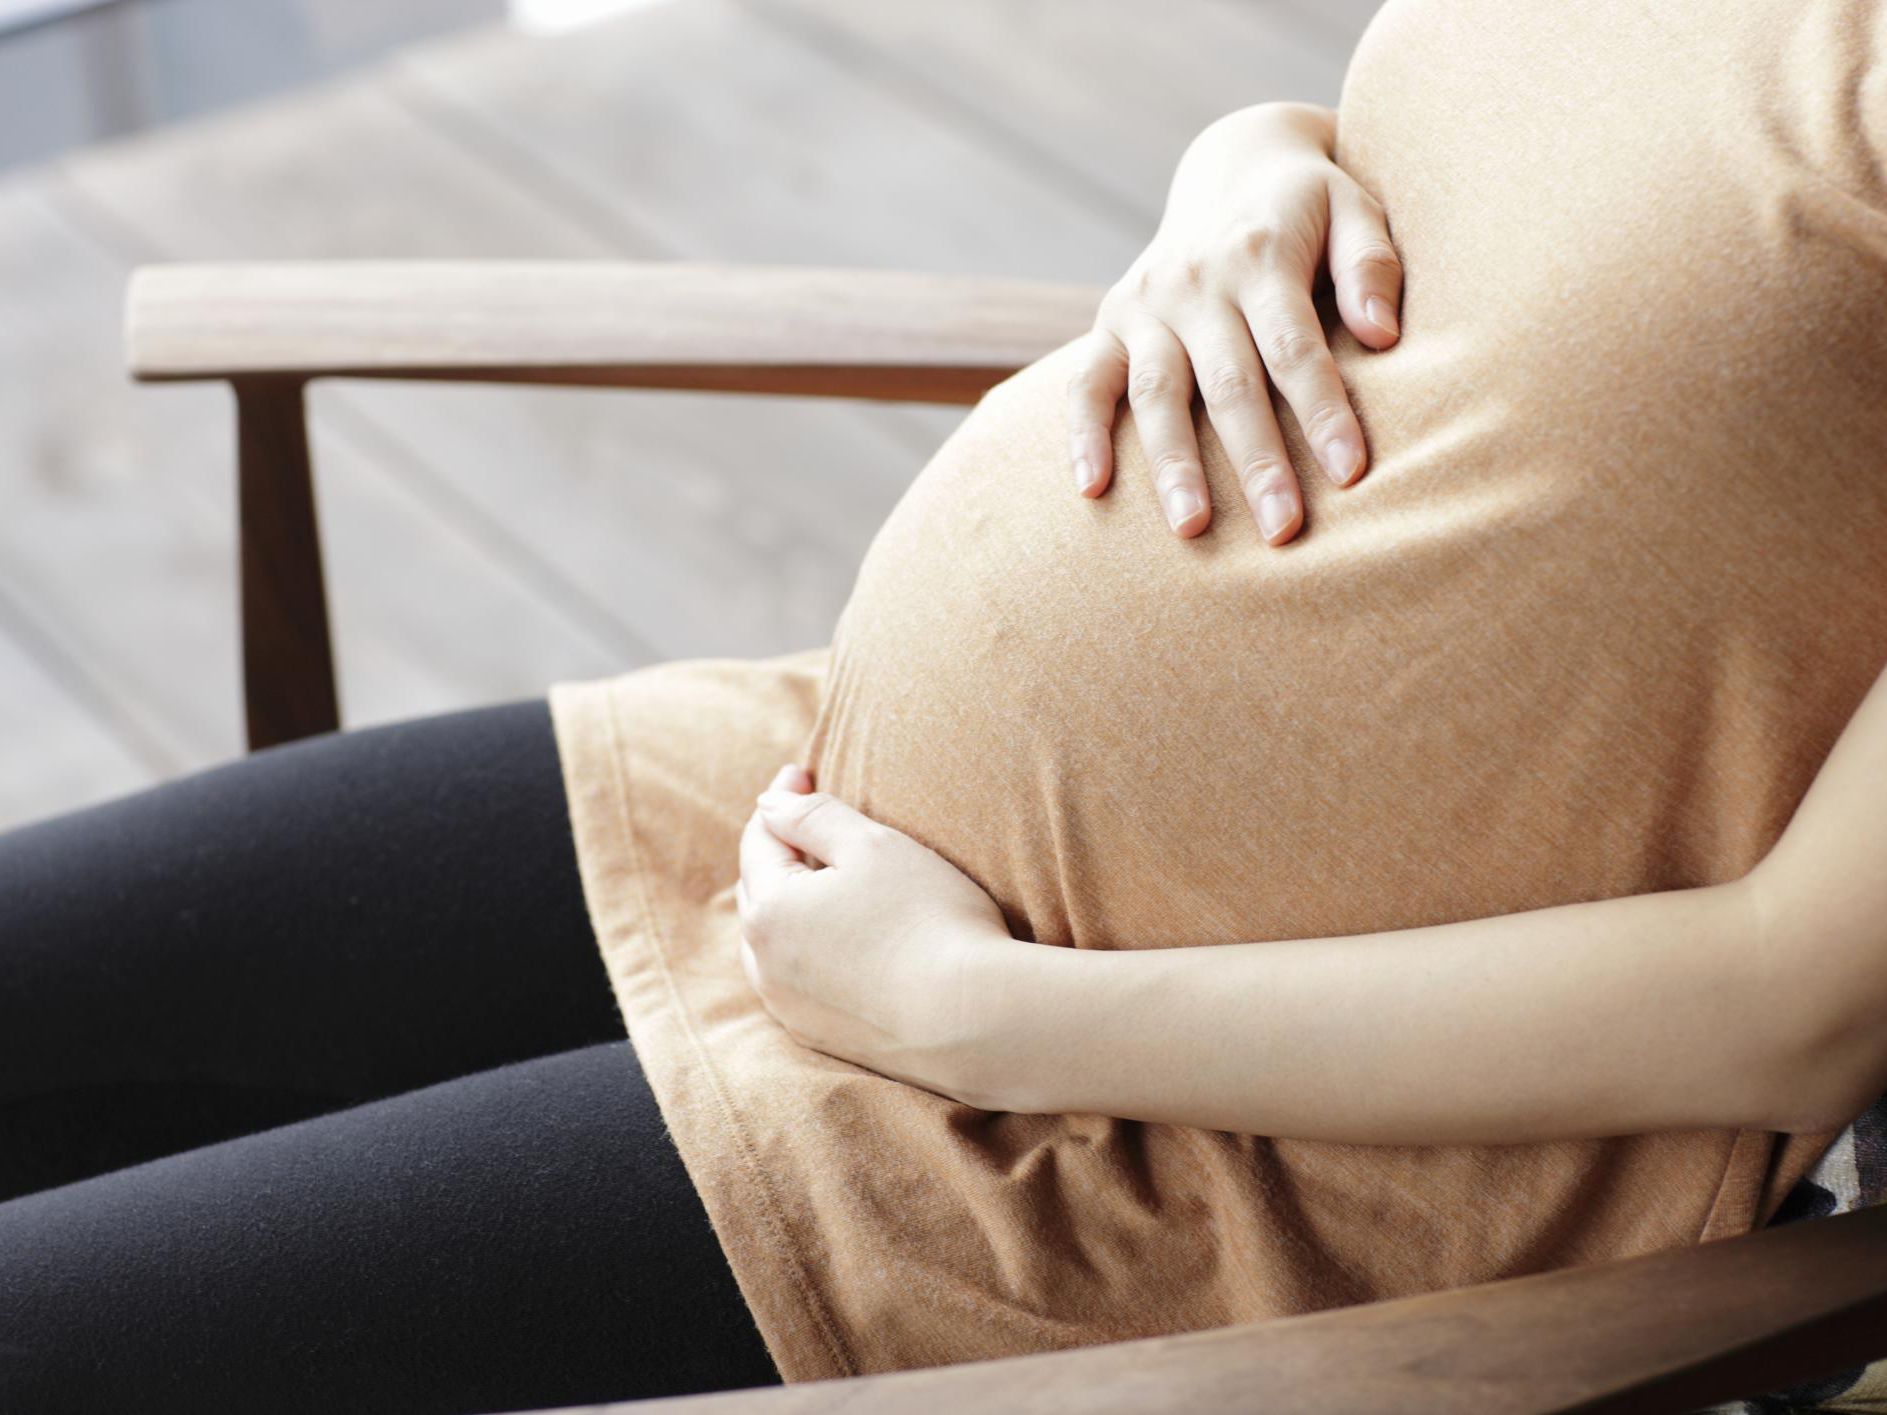 A pregnant women wearing skin top sitting on a chair